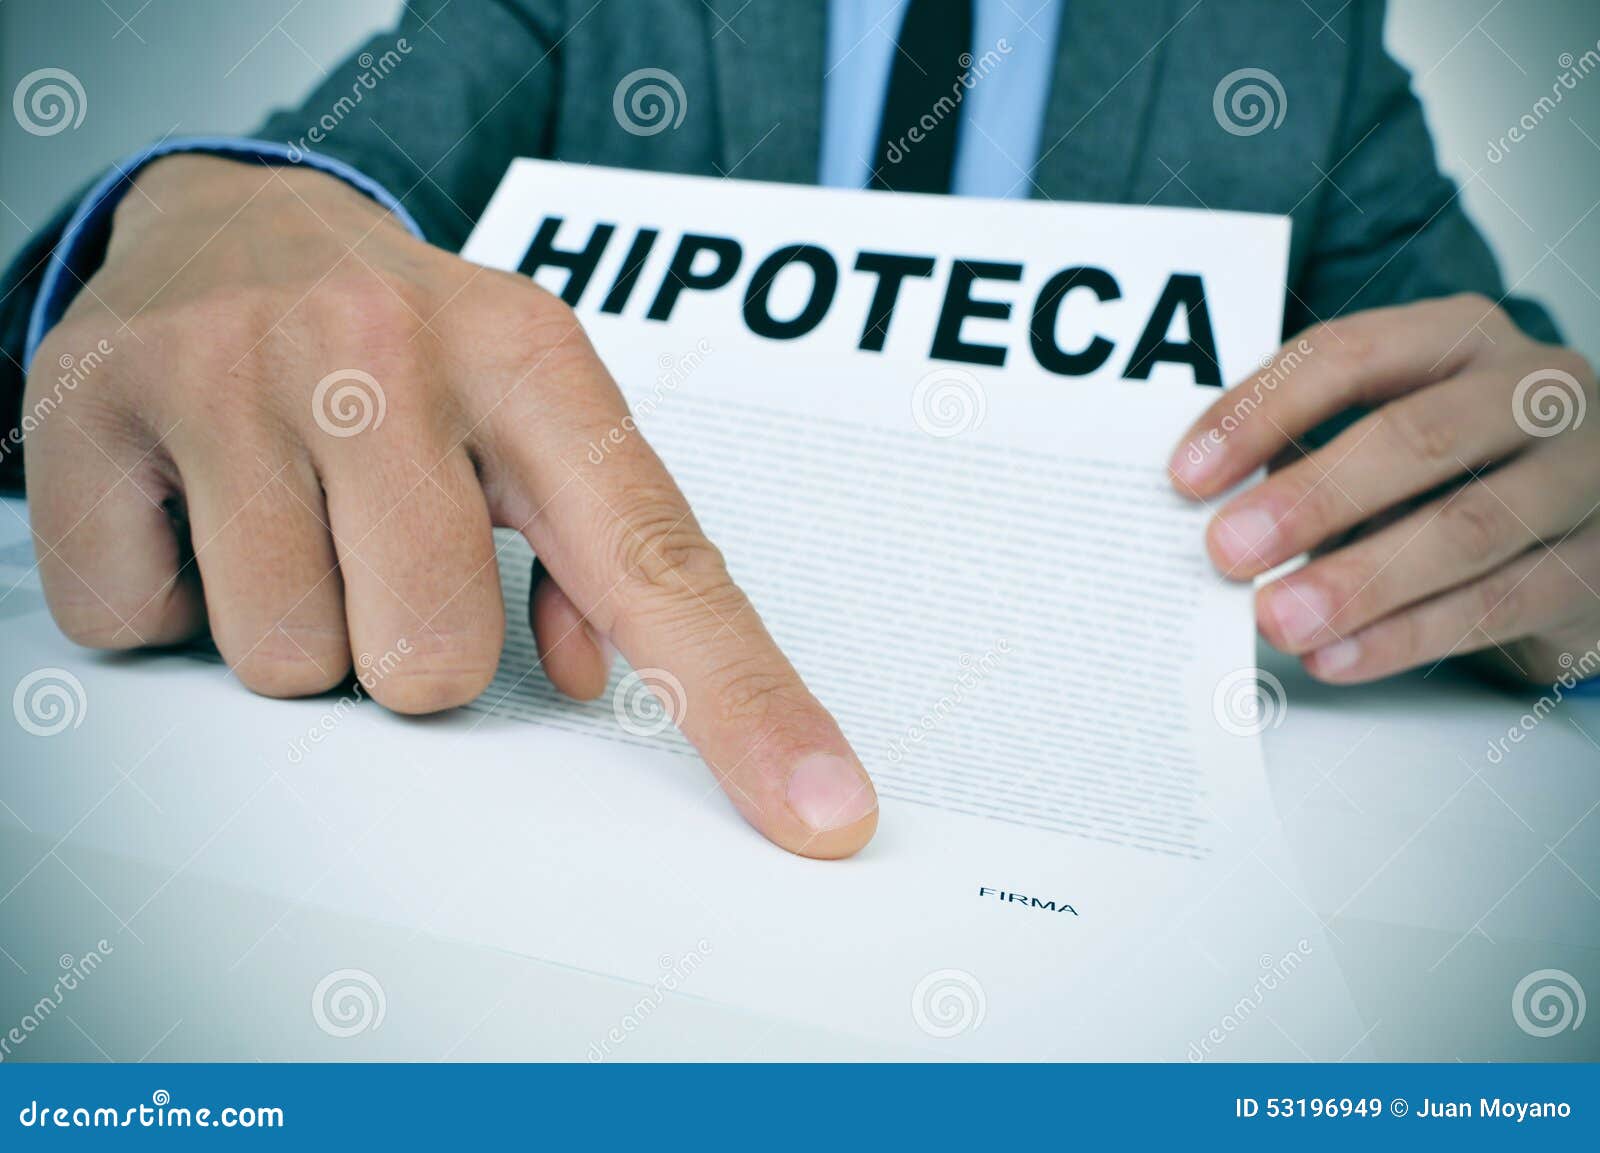 man with a document with the word hipoteca, mortgage loan contra